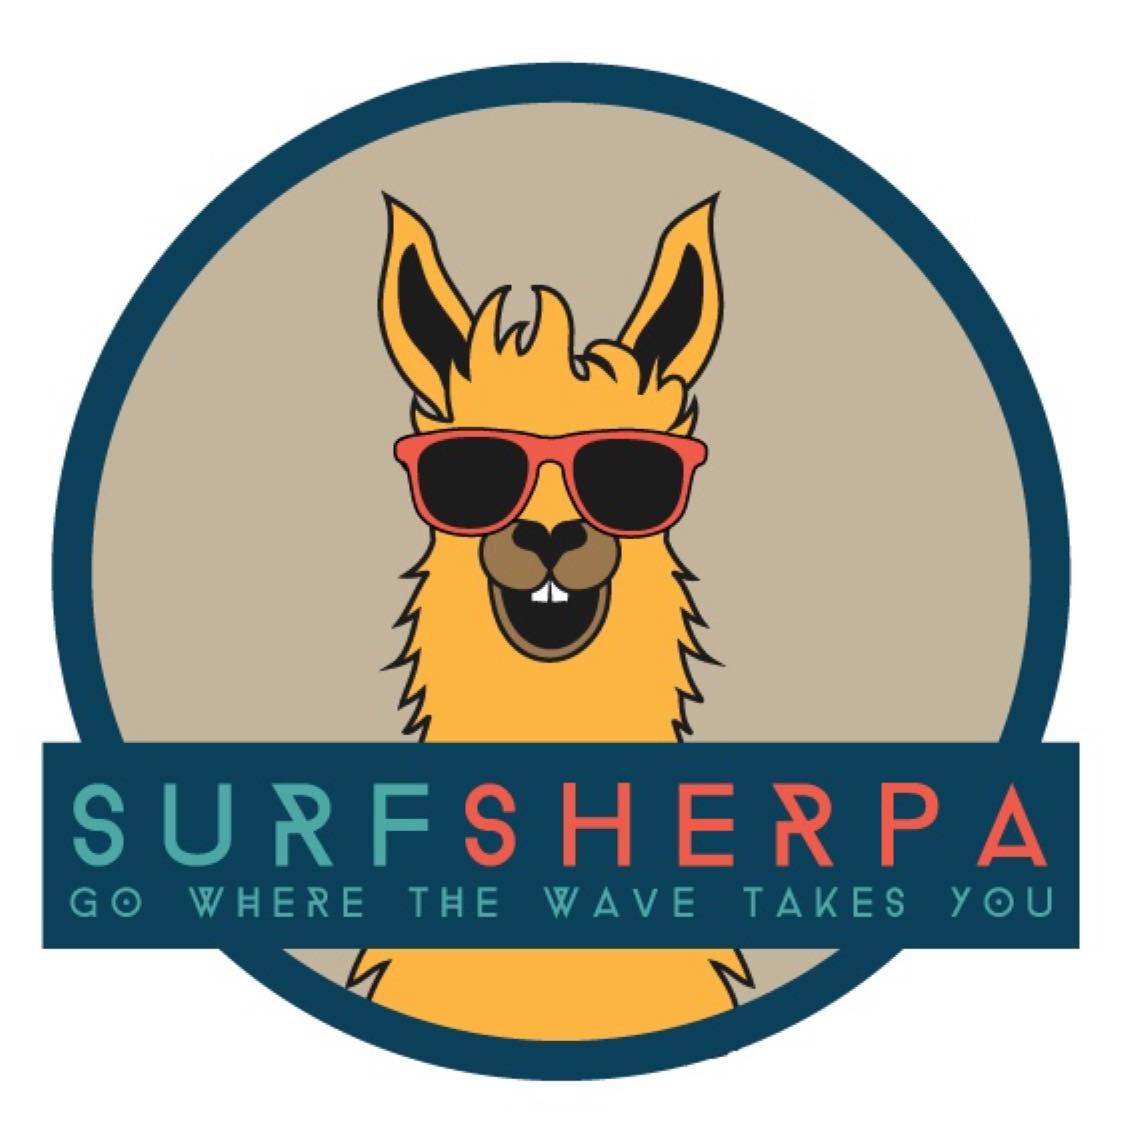  Surf Sherpa provided some awesome surf hats for the women in our programs. Taking care of our bodies and protecting ourselves from the sun in this way is an expression of self-love!   